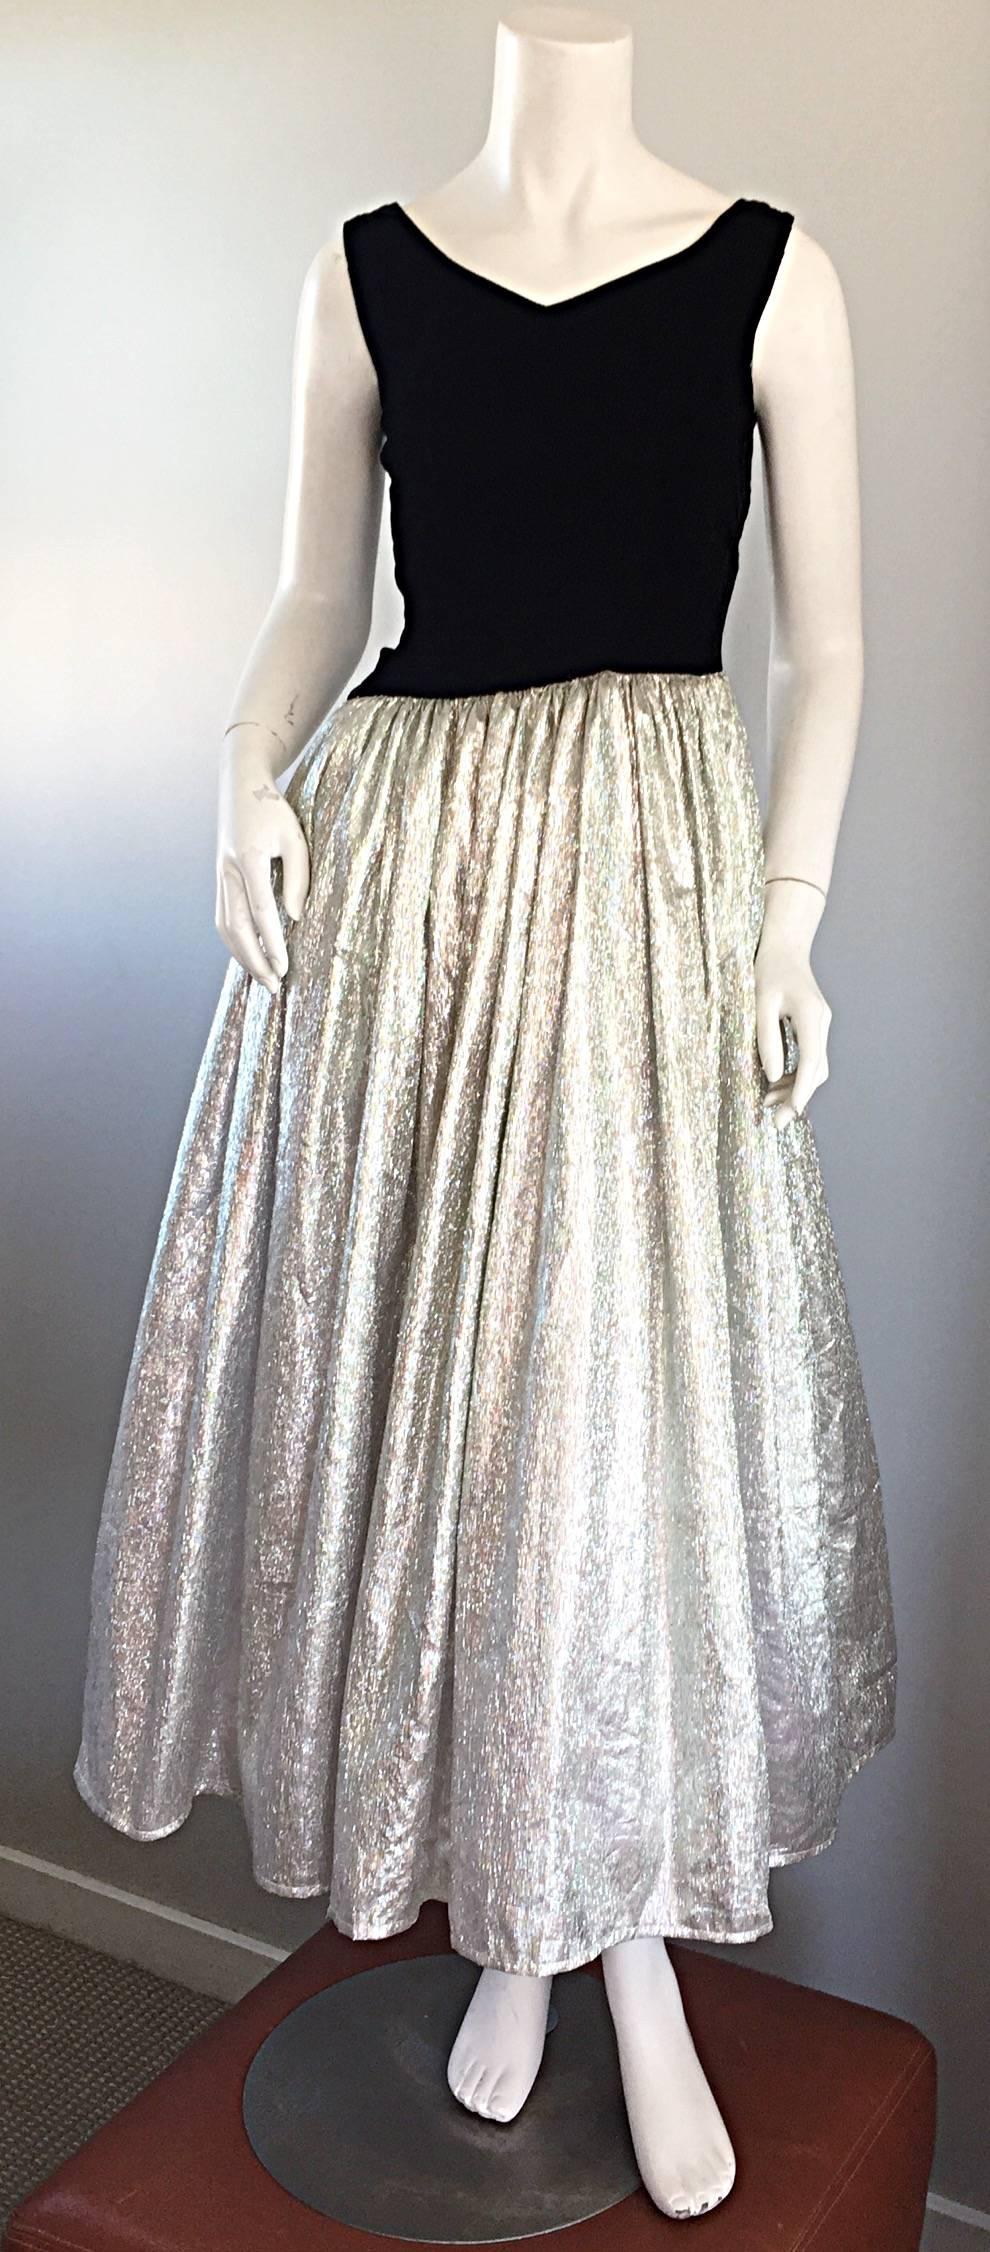 Beautiful 1980s does 1950s black and silver iridescent metallic pouf dress! Features a slight asymmetrical fitted black velvet bodice with a wonderful silver iridescent full skirt, that gives off a 'prism' effect in the light. Hidden zipper up the